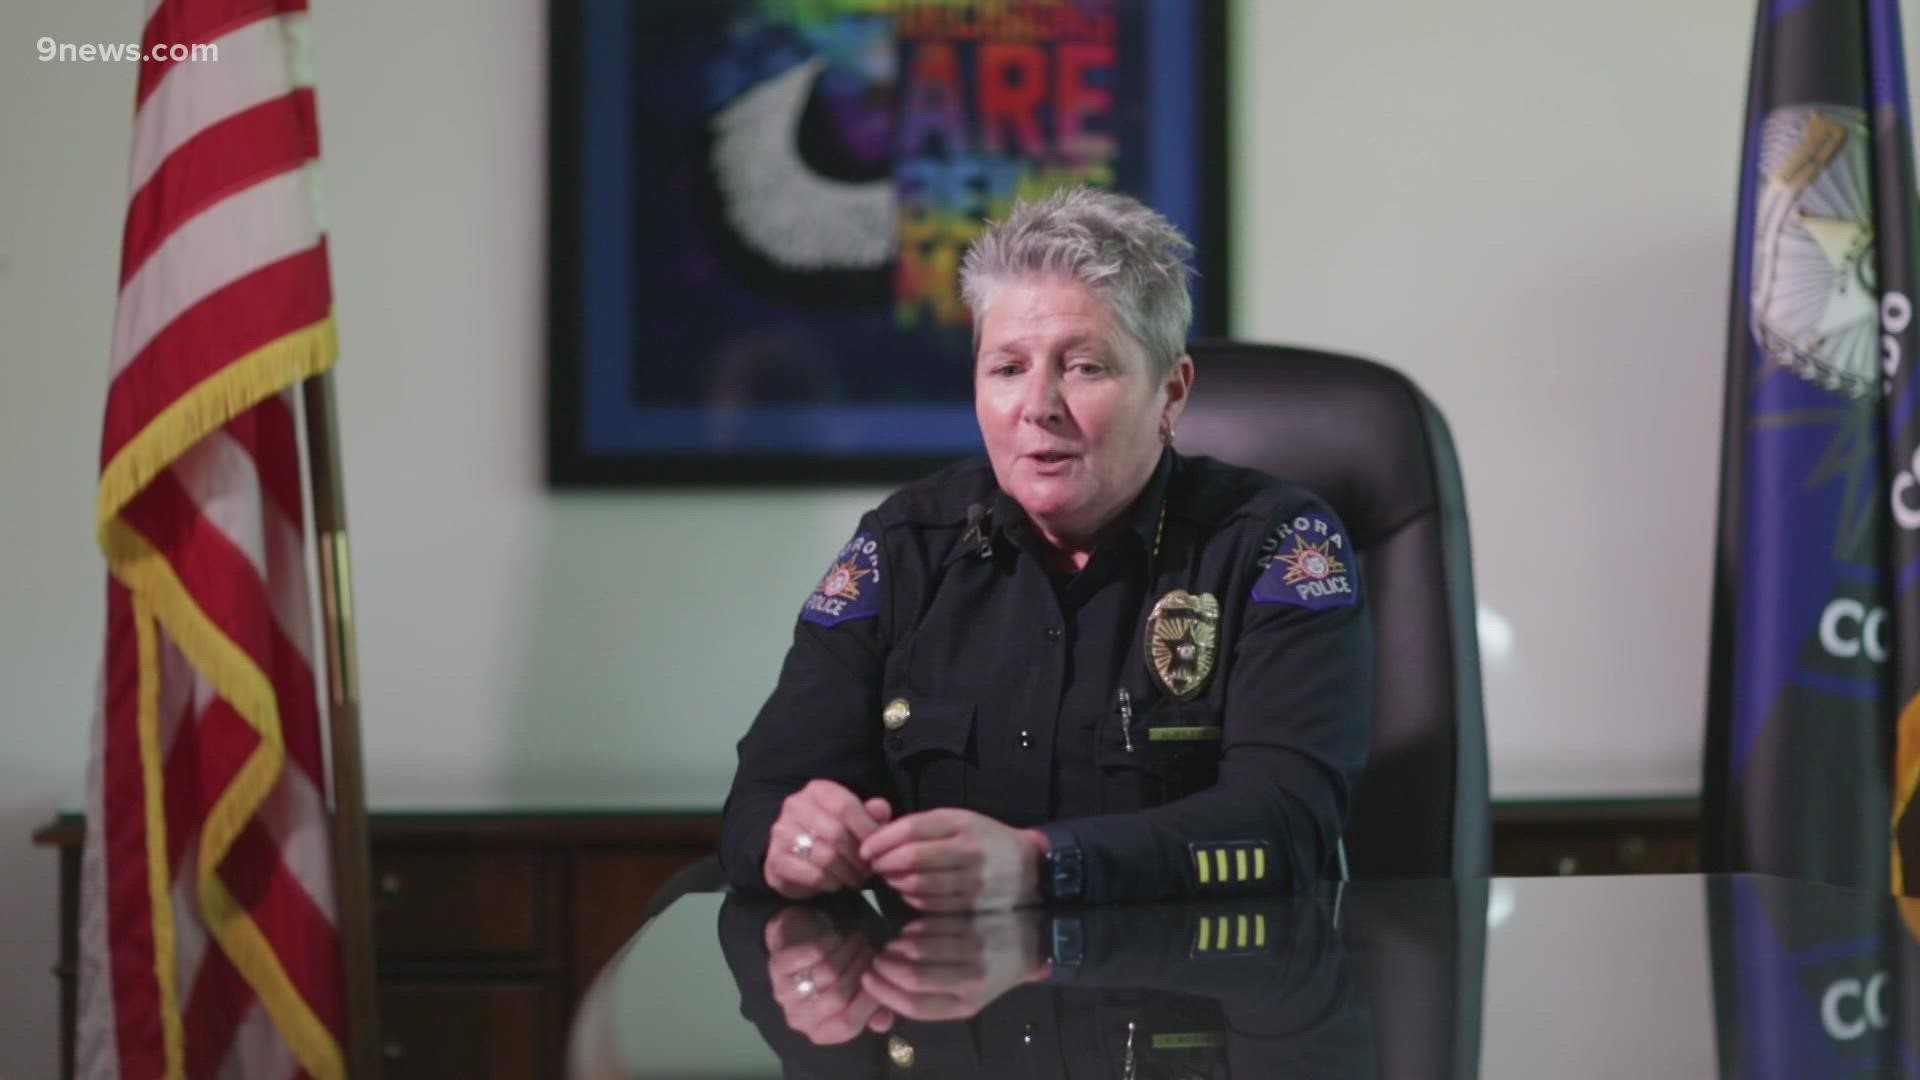 Officers have complained that she's not present enough as she's working to change the department's culture and relationship with the community.